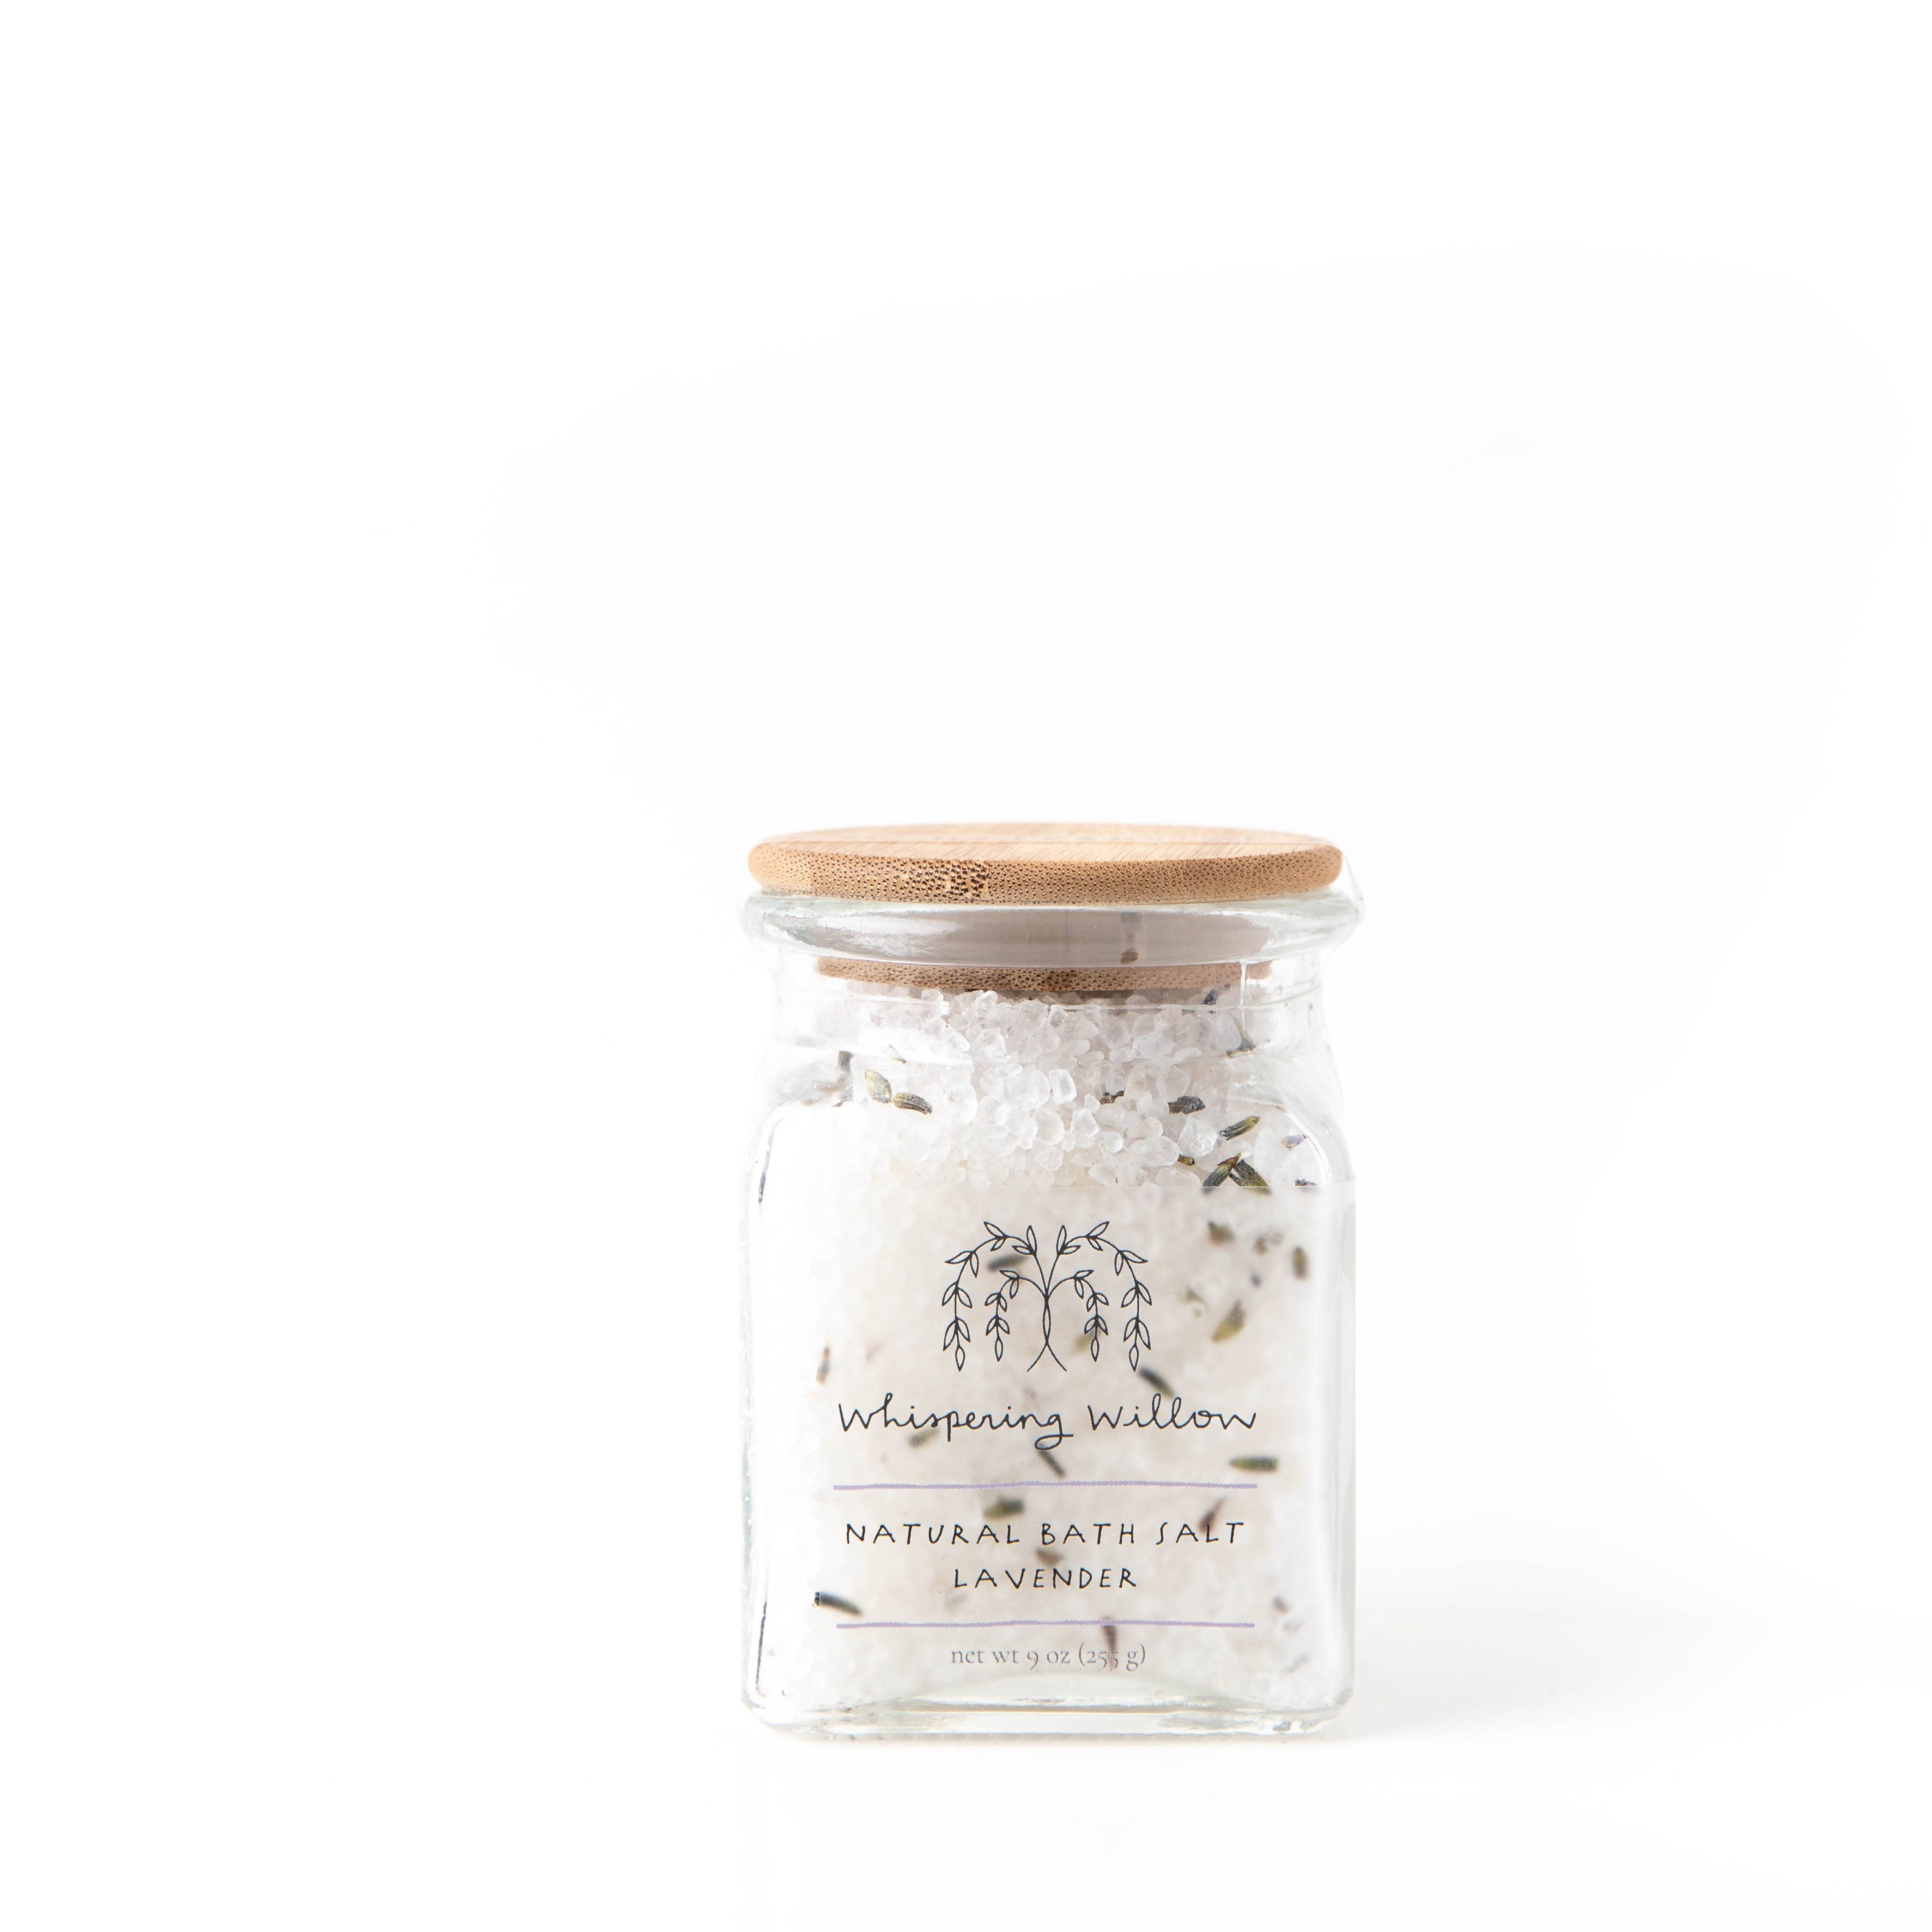 Lavender Natural Bath Salt by Whispering Willow